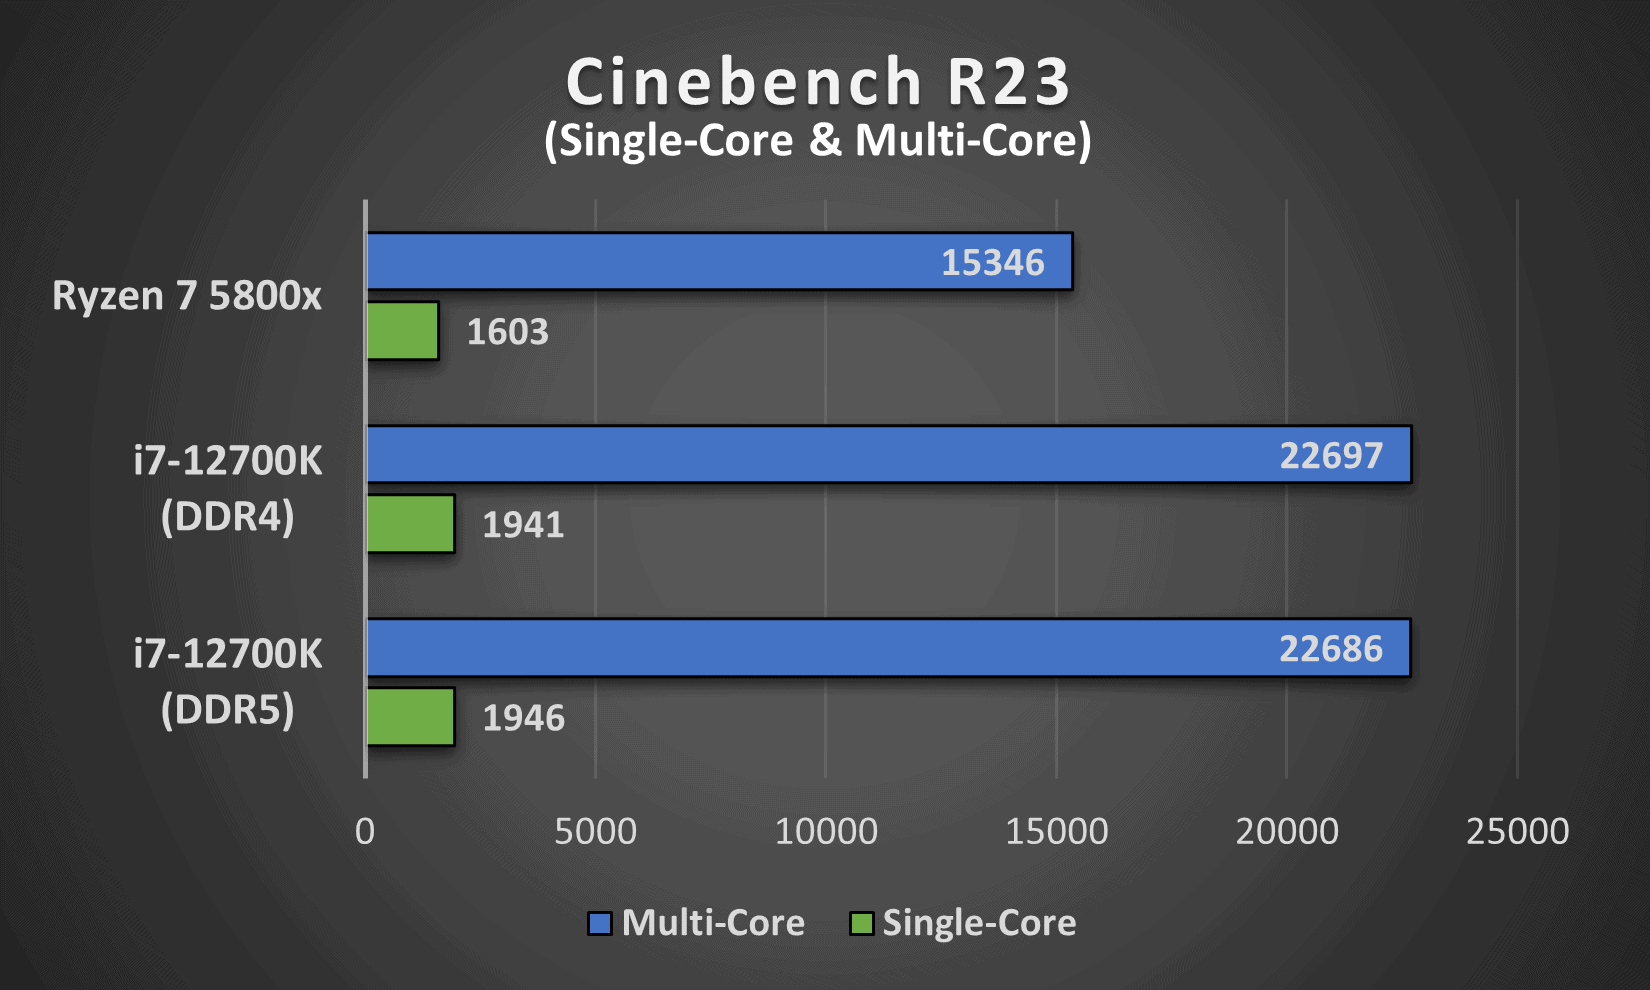 Cinebench R23 performance comparison between Intel's i7 12700K (DDR4 and DDR5) and AMD's Ryzen 7 5800x